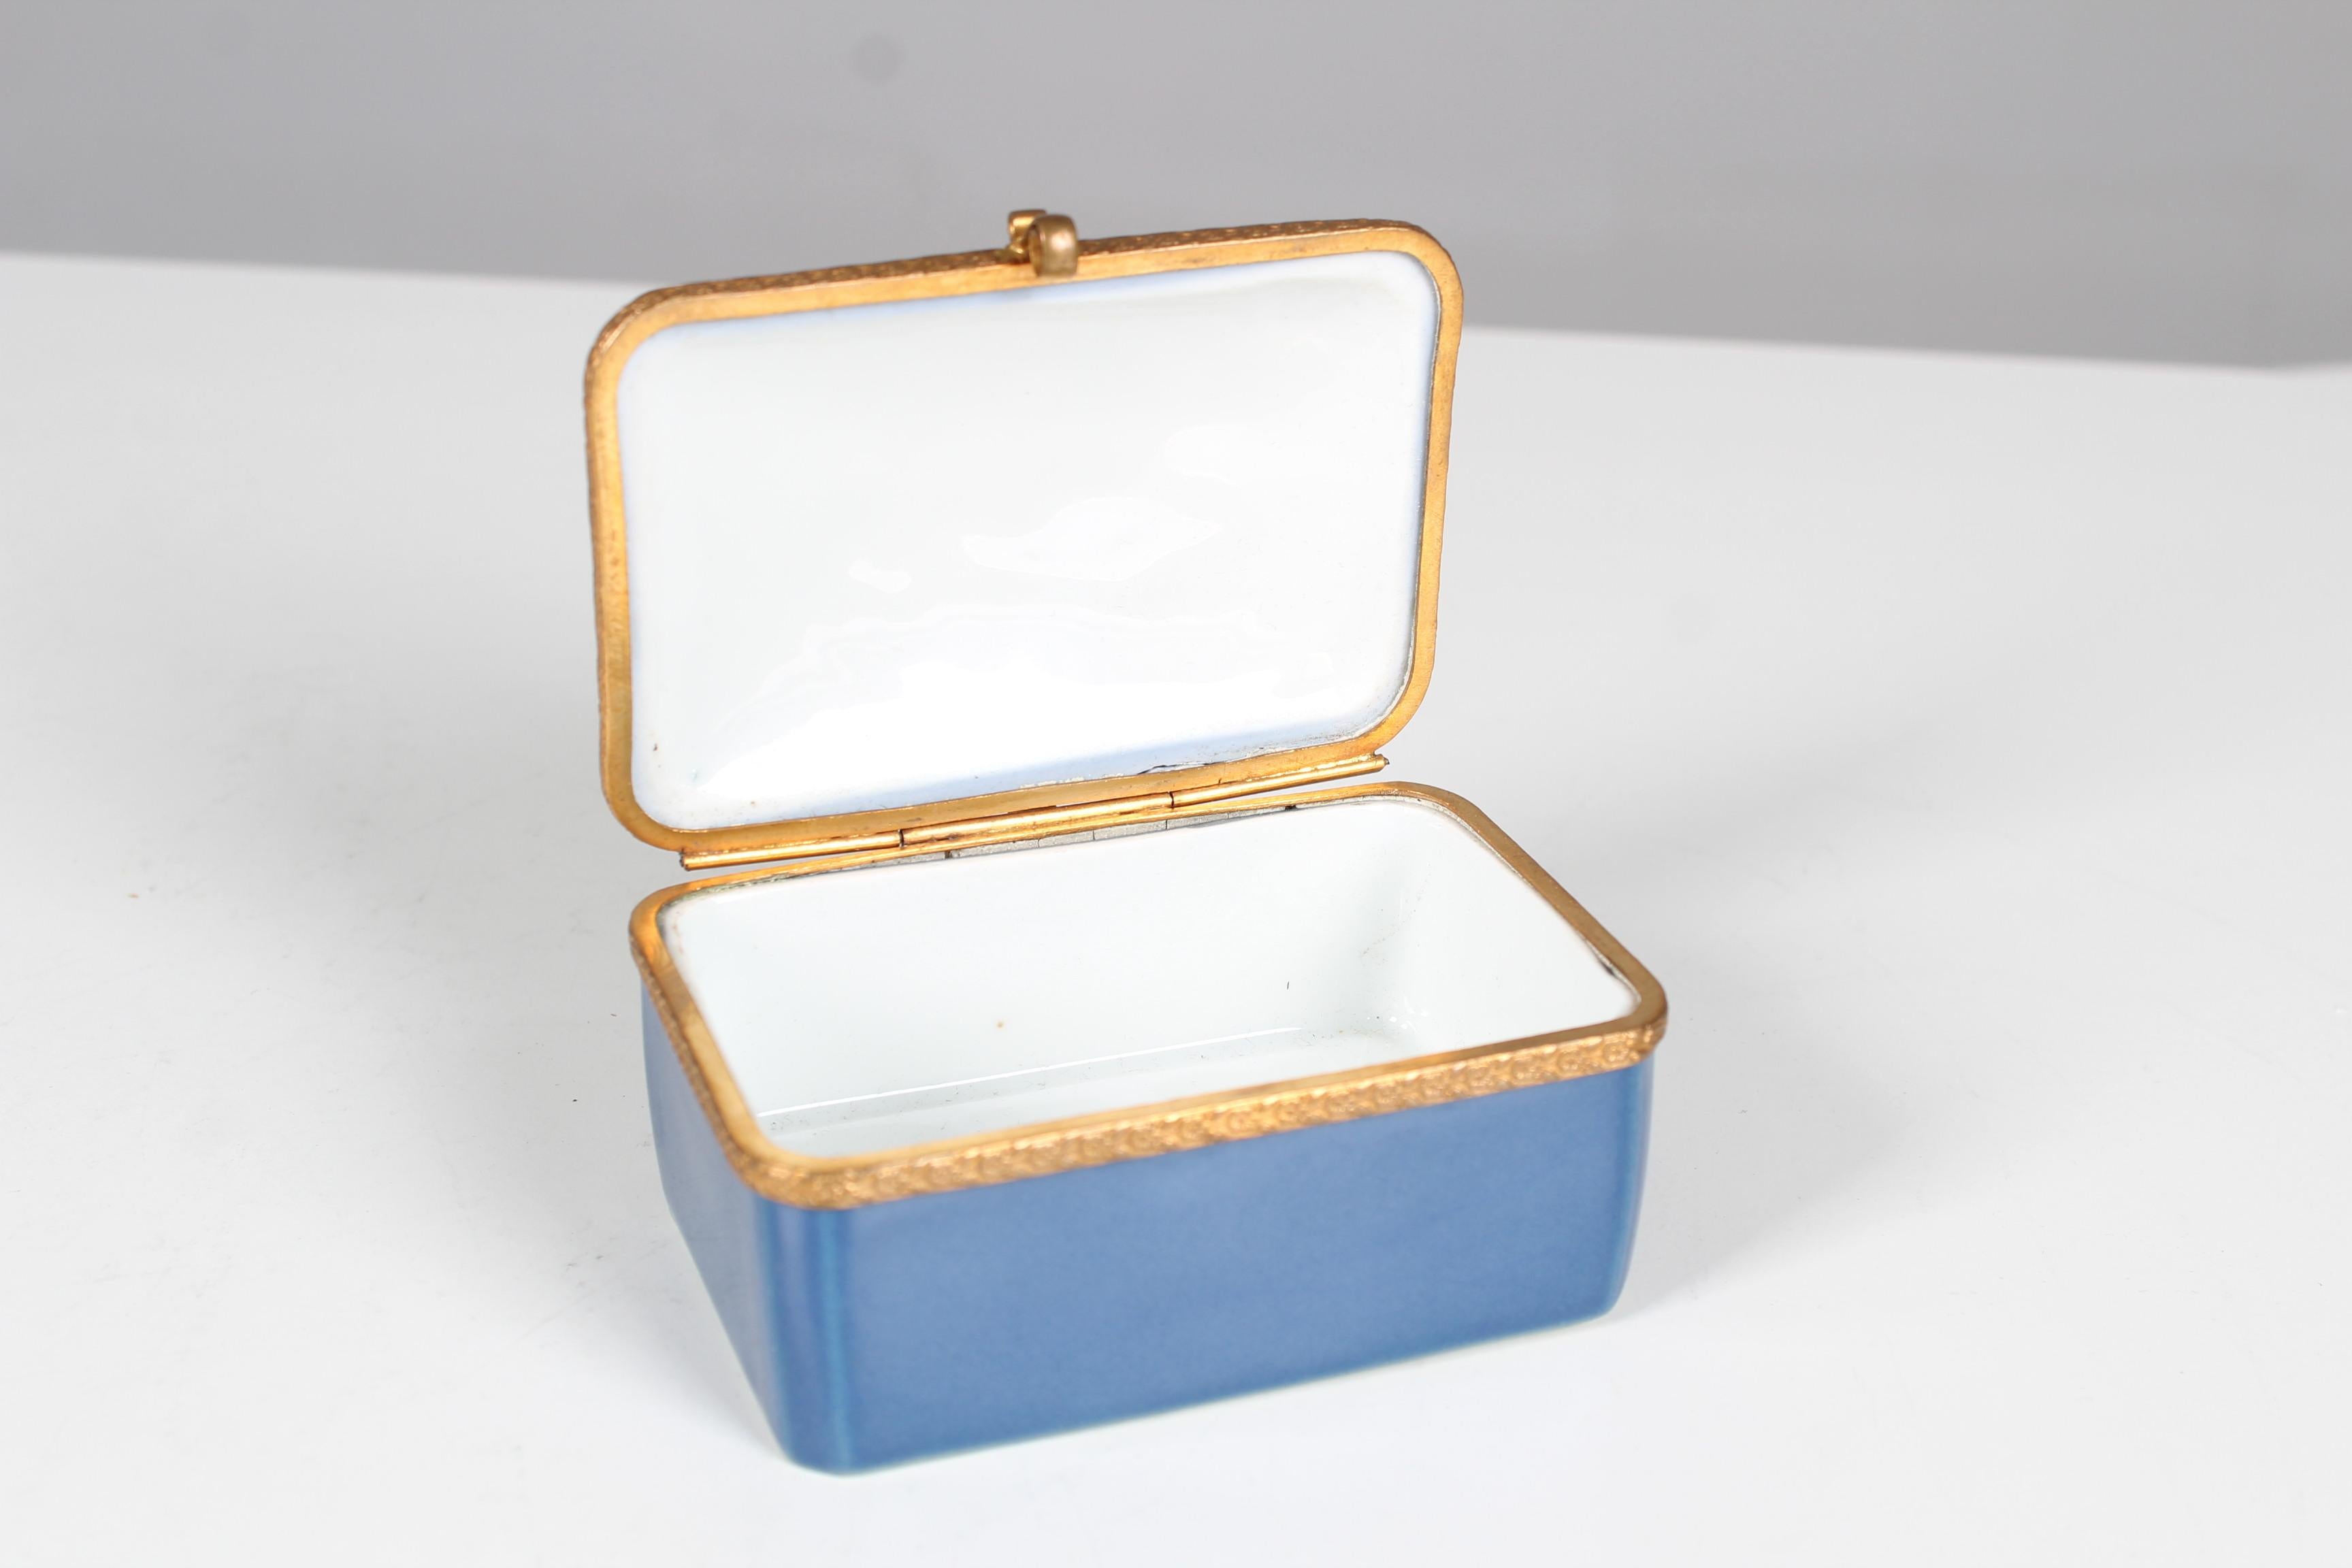 Beautiful antique porcelain jewelry box.
Signed 